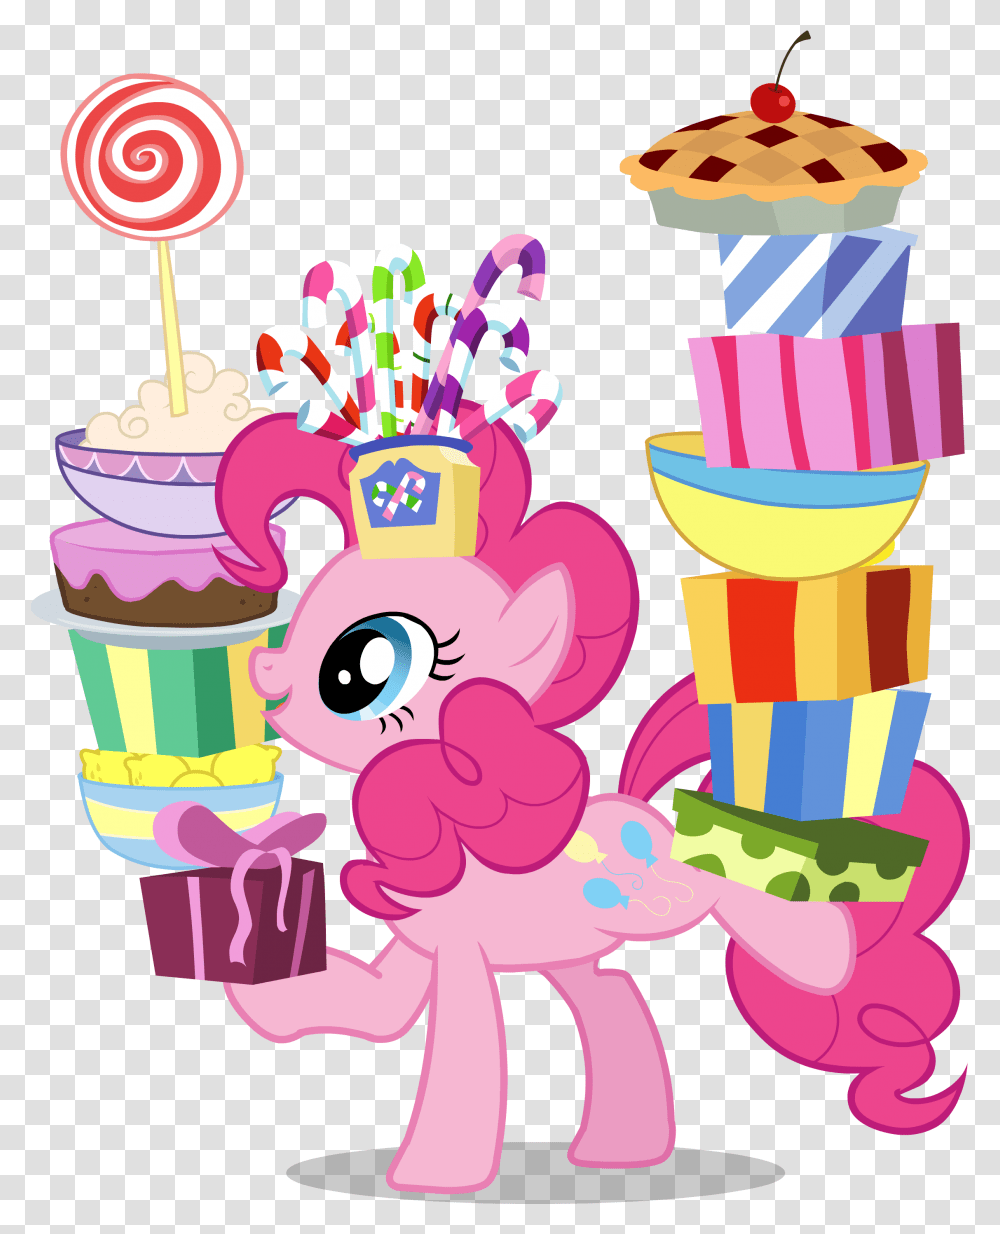 Little Pony With Cakes And Gifts Clipart 47144 Free Icons My Little Pony Birthday, Cream, Dessert, Food, Sweets Transparent Png